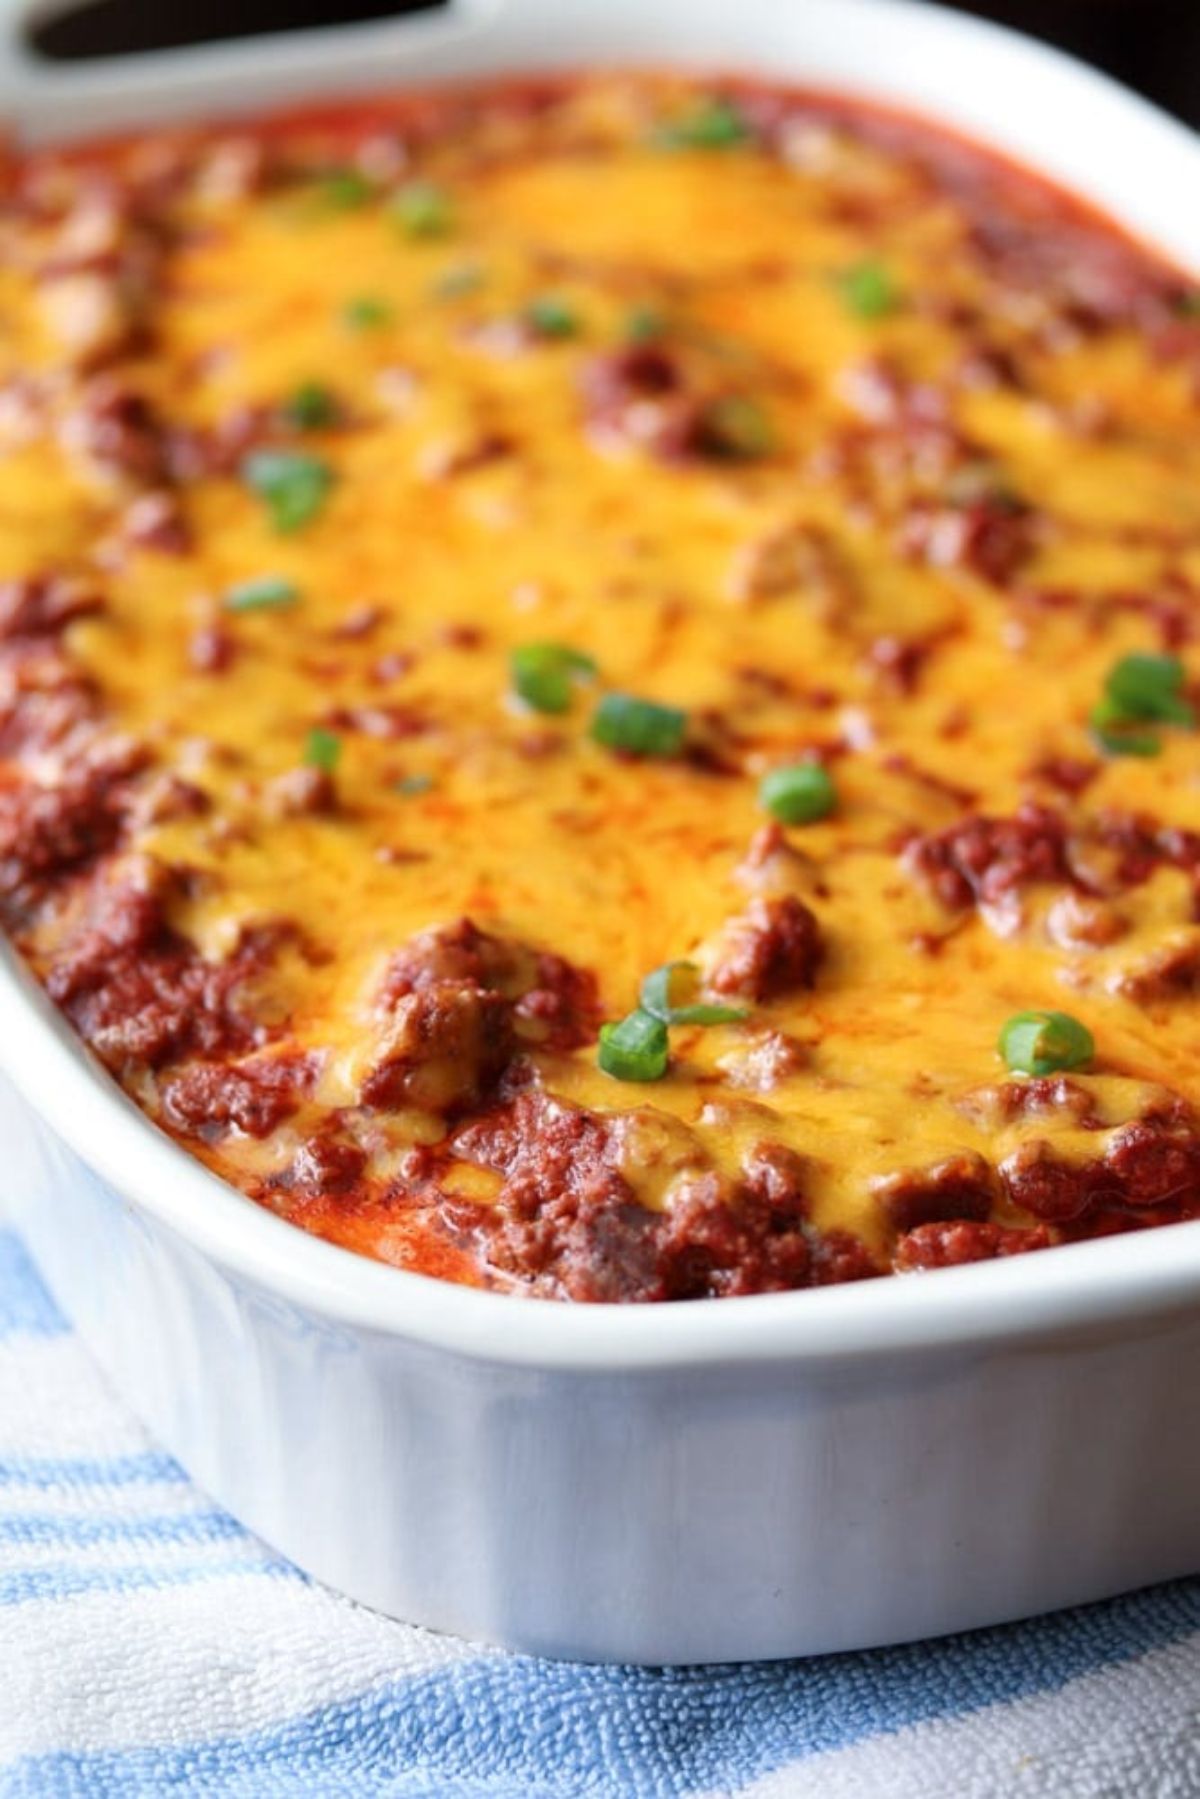 a slightly blurred photo of a white dish of a meaty and cheesy casserole with chive garnish